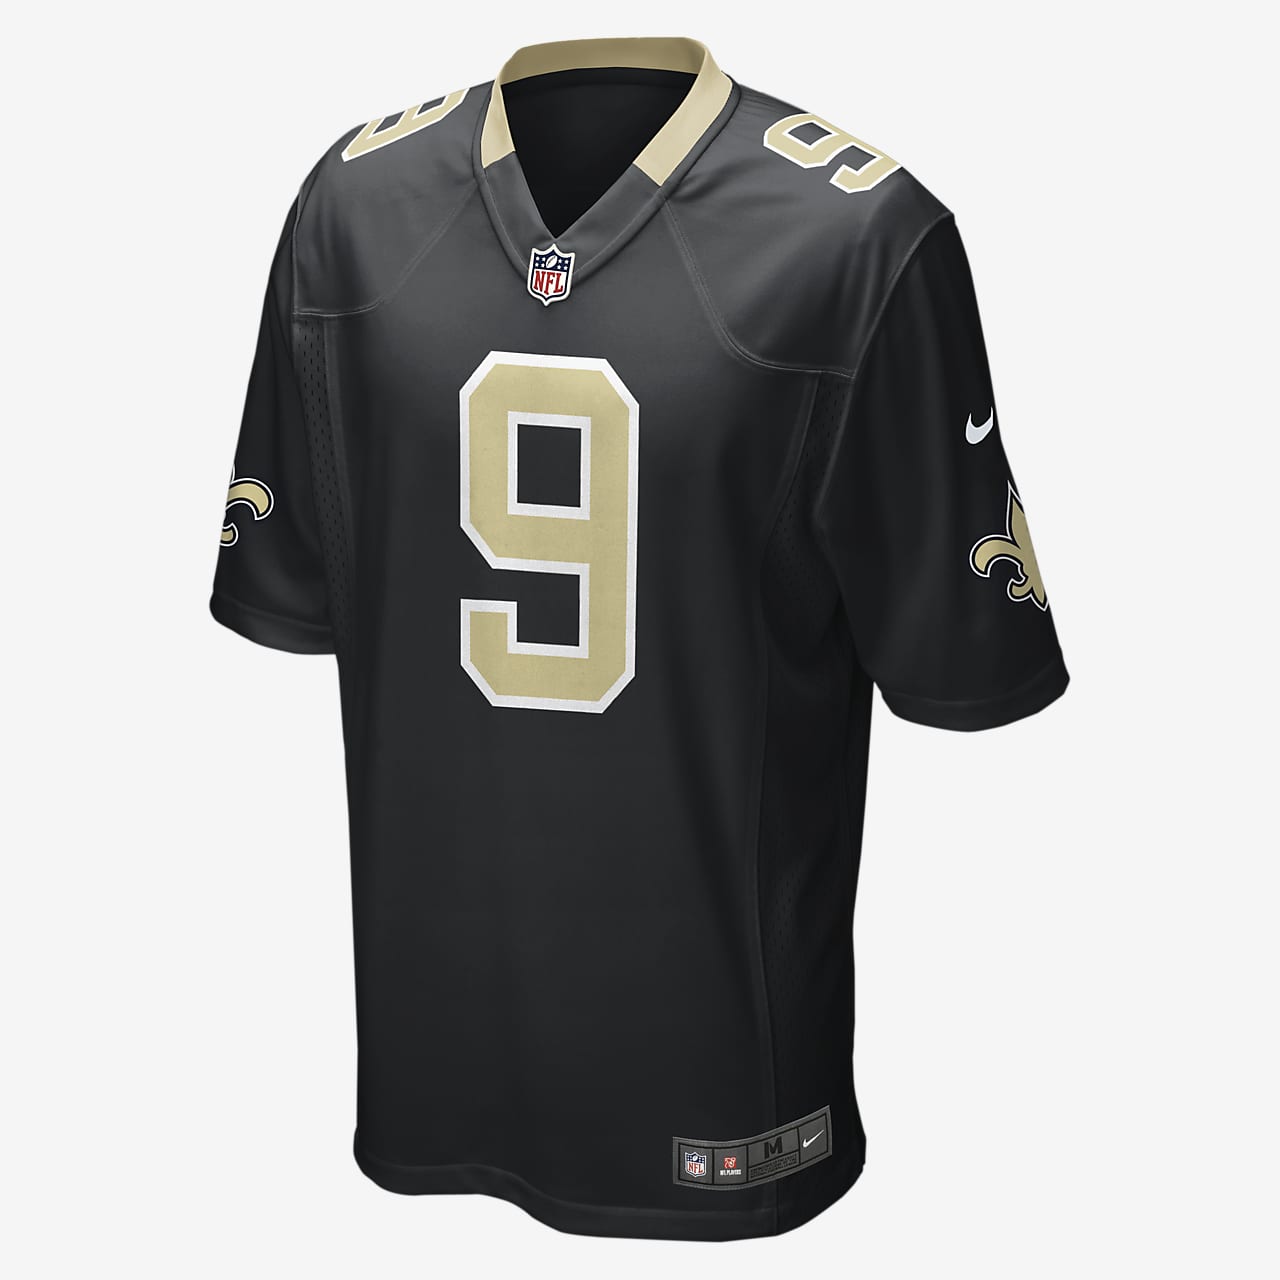 what was on drew brees jersey yesterday